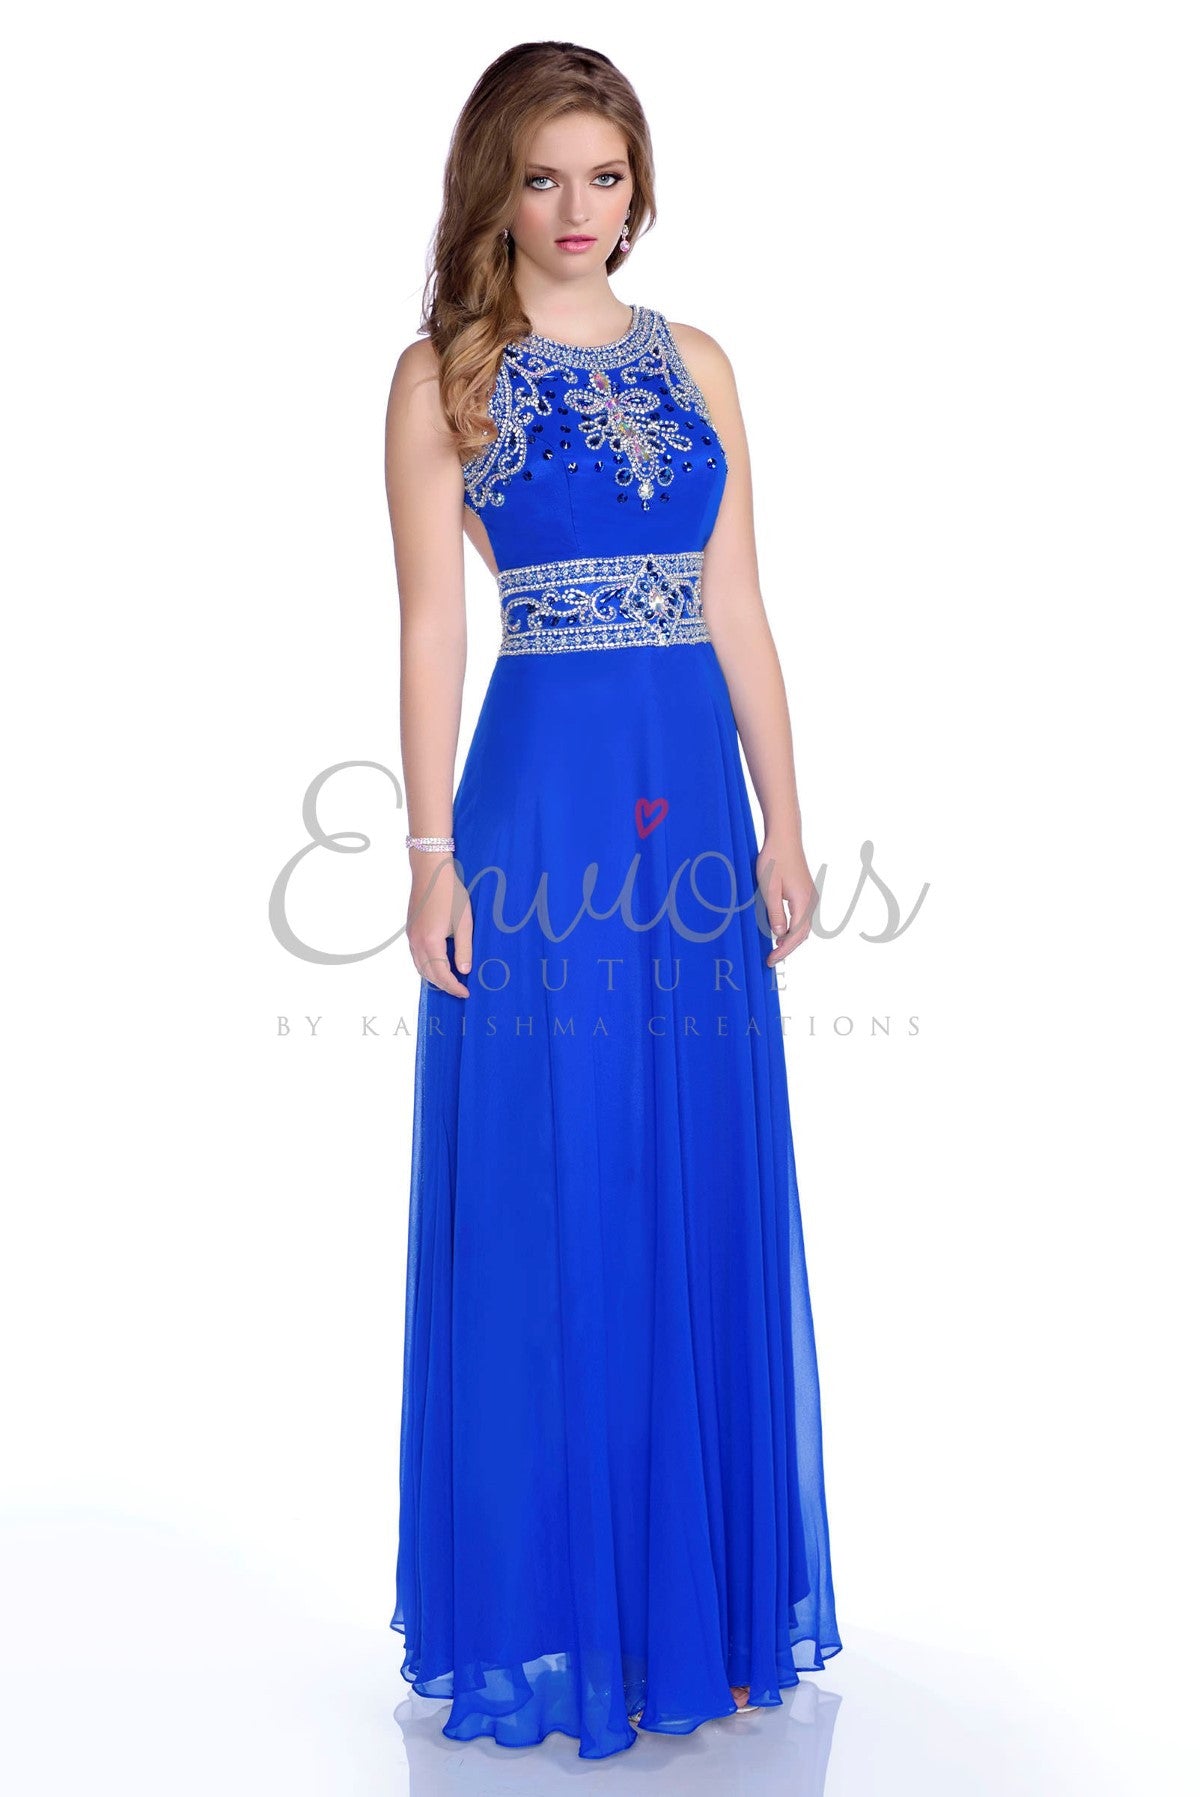 Envious Couture by Karishma Creations style 16211 size 2 in Royal Blue